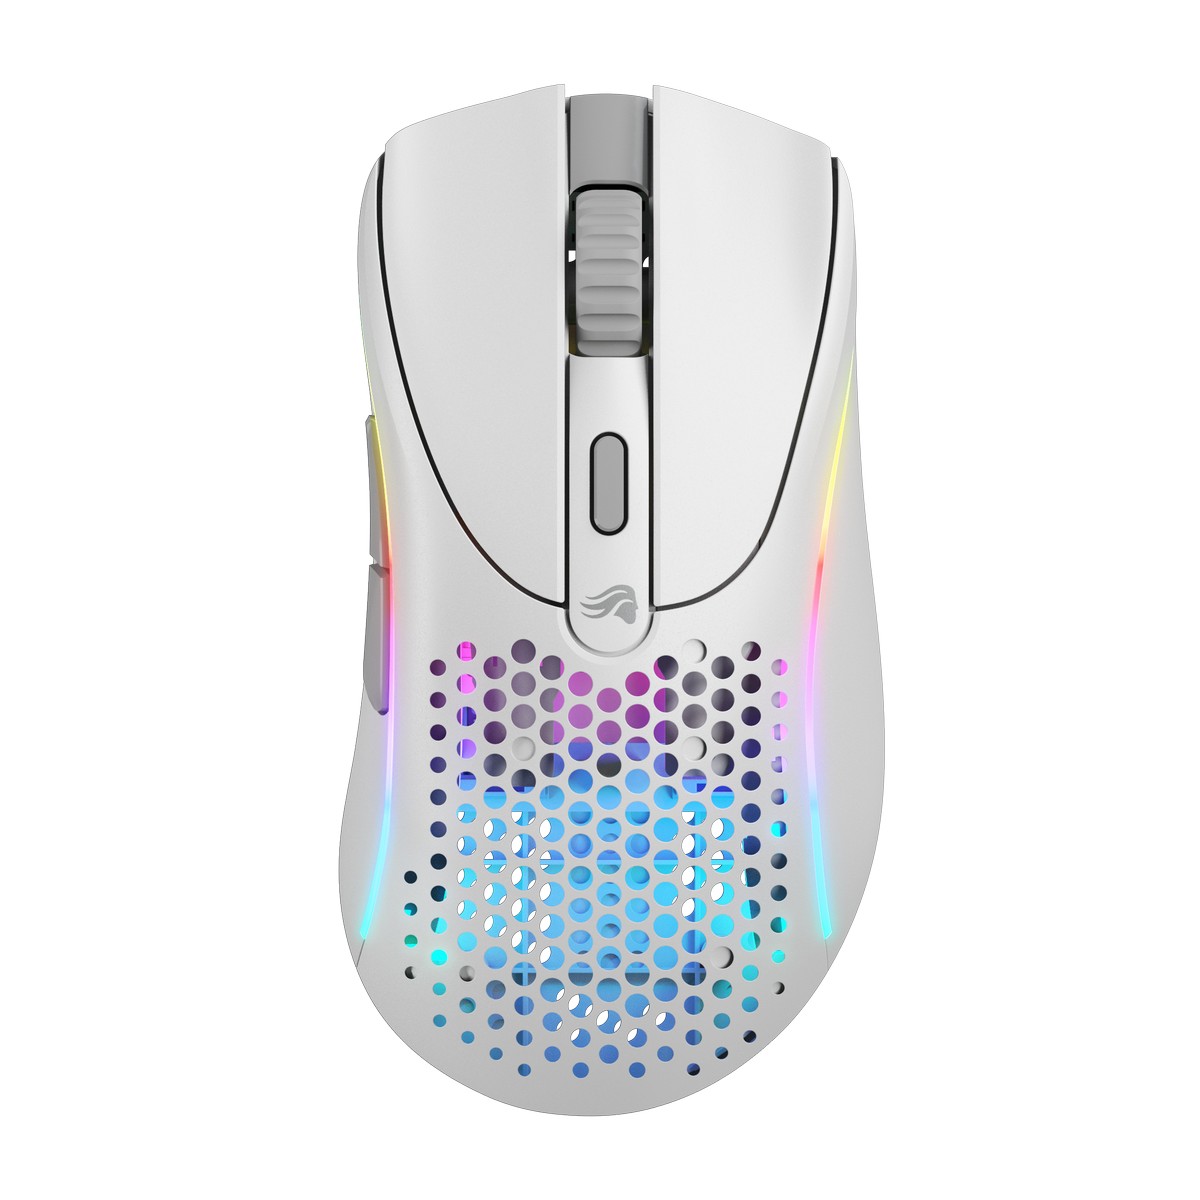 Glorious Model D 2 Wireless Optical RGB Lightweight Gaming Mouse - Matte White